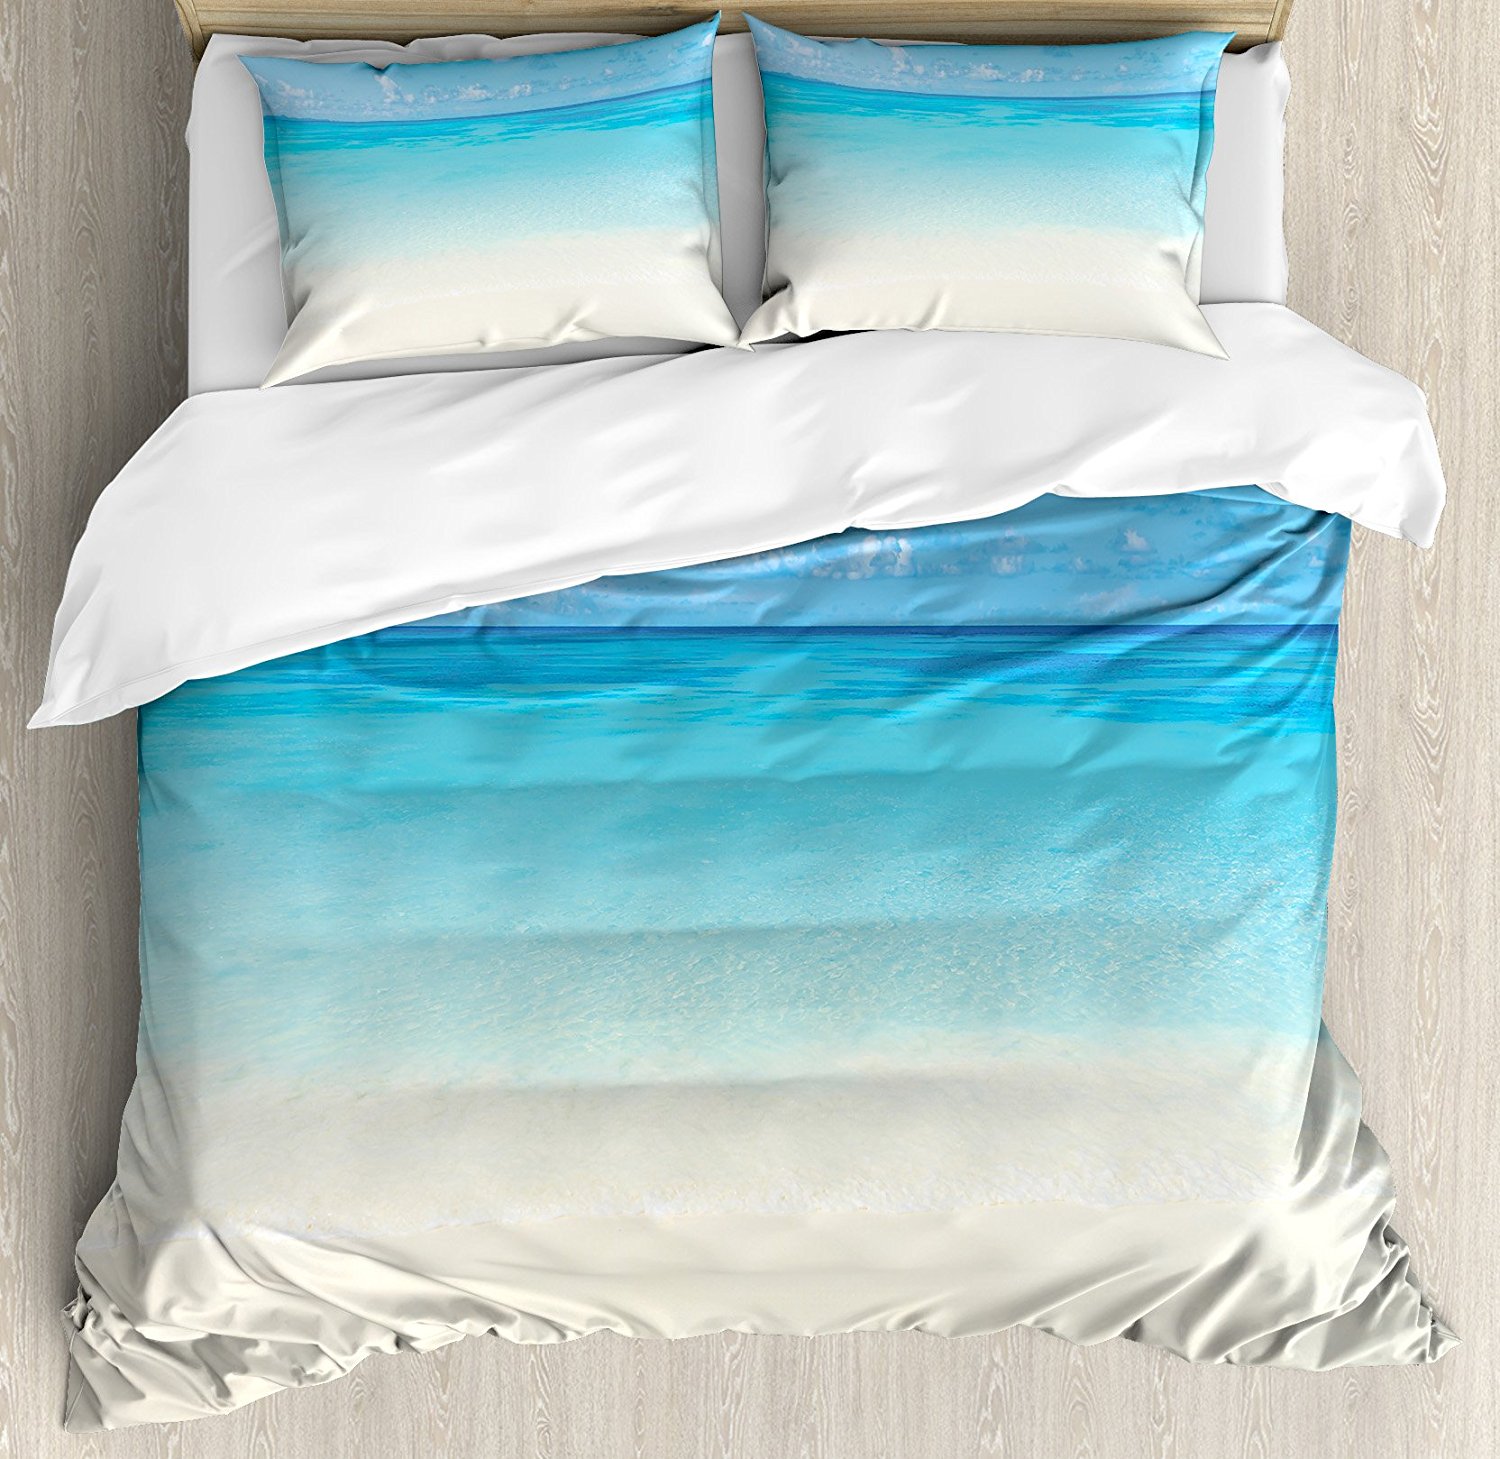 How to Find the BEST Beach Themed Bedding | Sand Between My Piggies ...